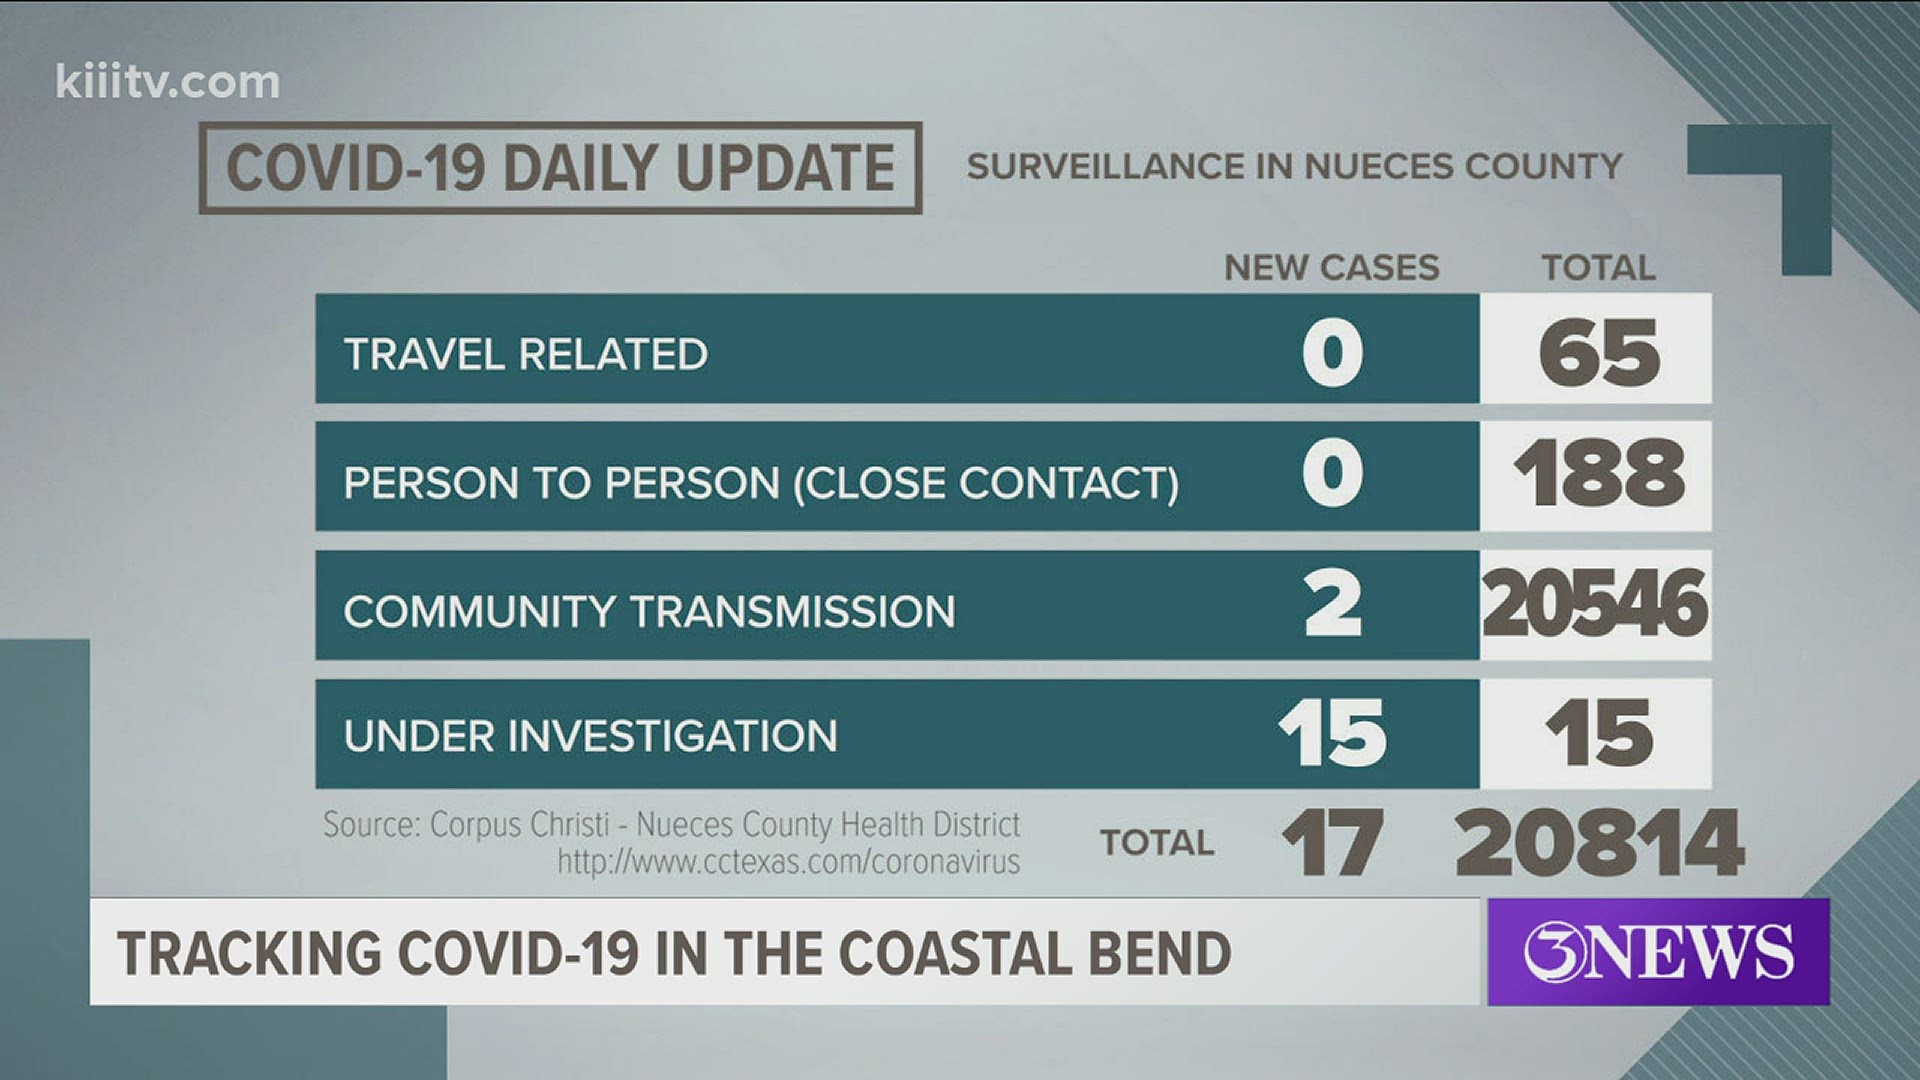 There were no COVID-19 related deaths reported on Monday. 17 new cases were added to Nueces County's total, 7 of those cases are from the state's data dump.